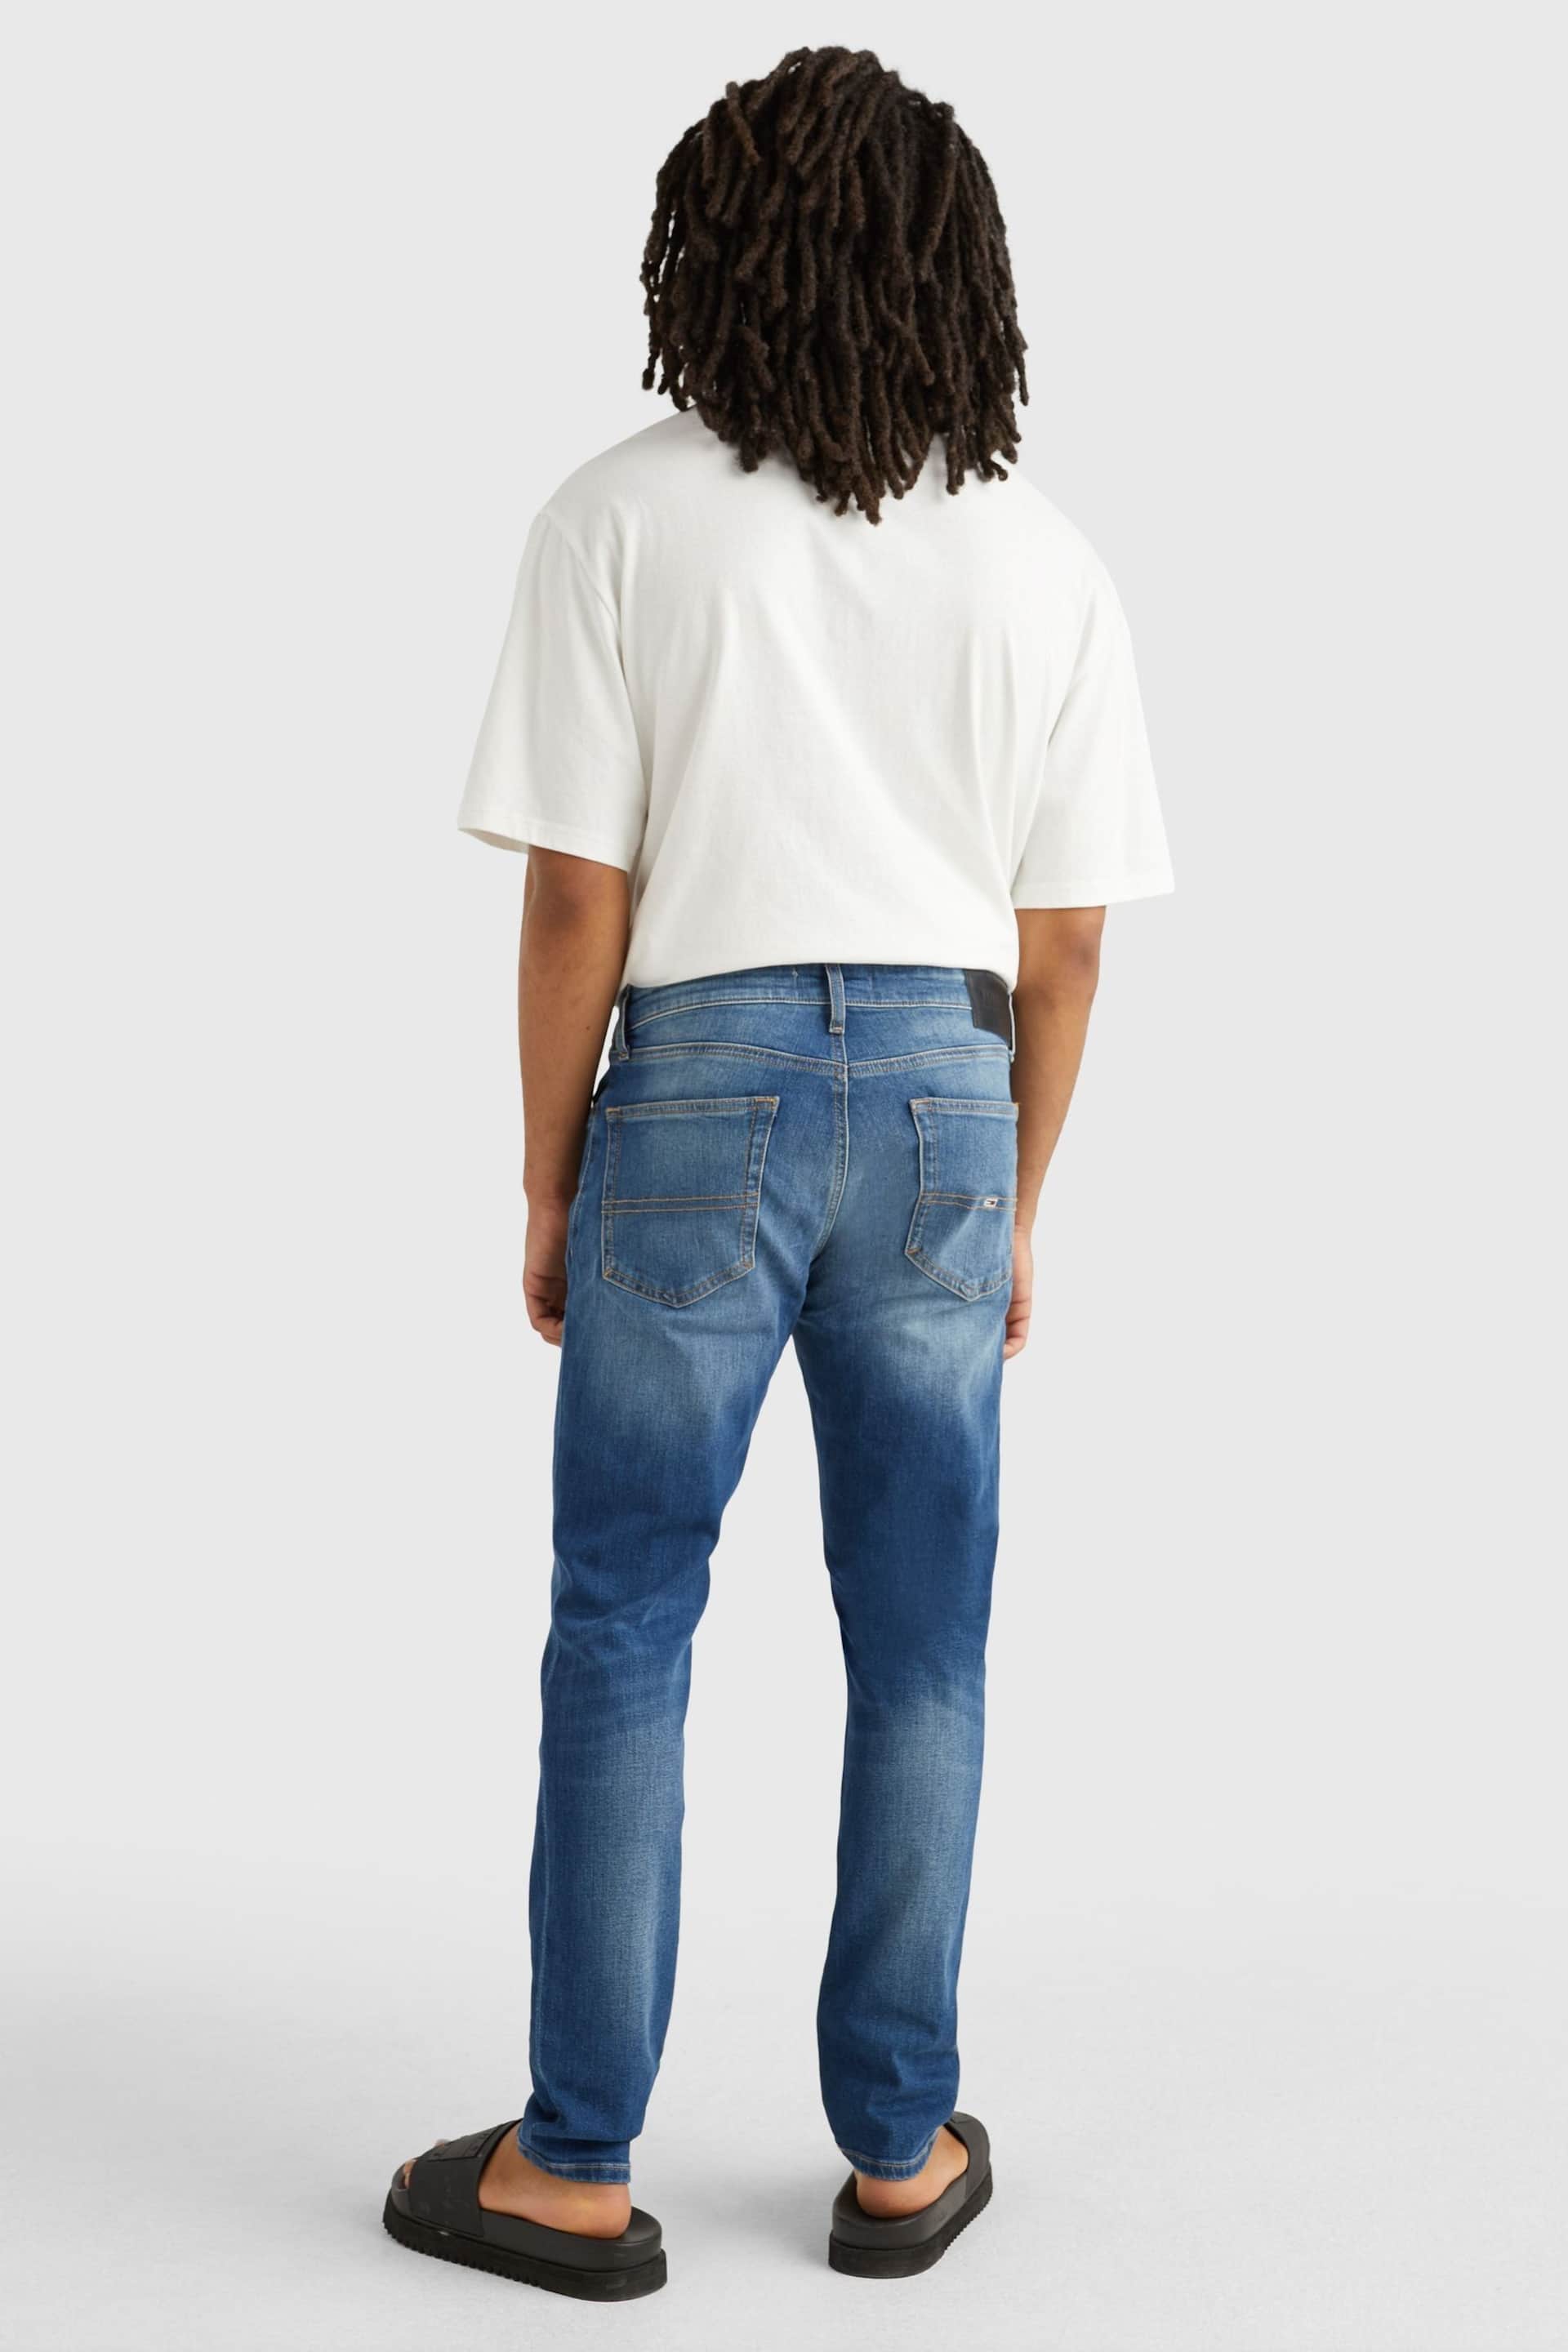 Tommy Jeans Blue Slim Tapered Fit Faded Jeans - Image 2 of 4